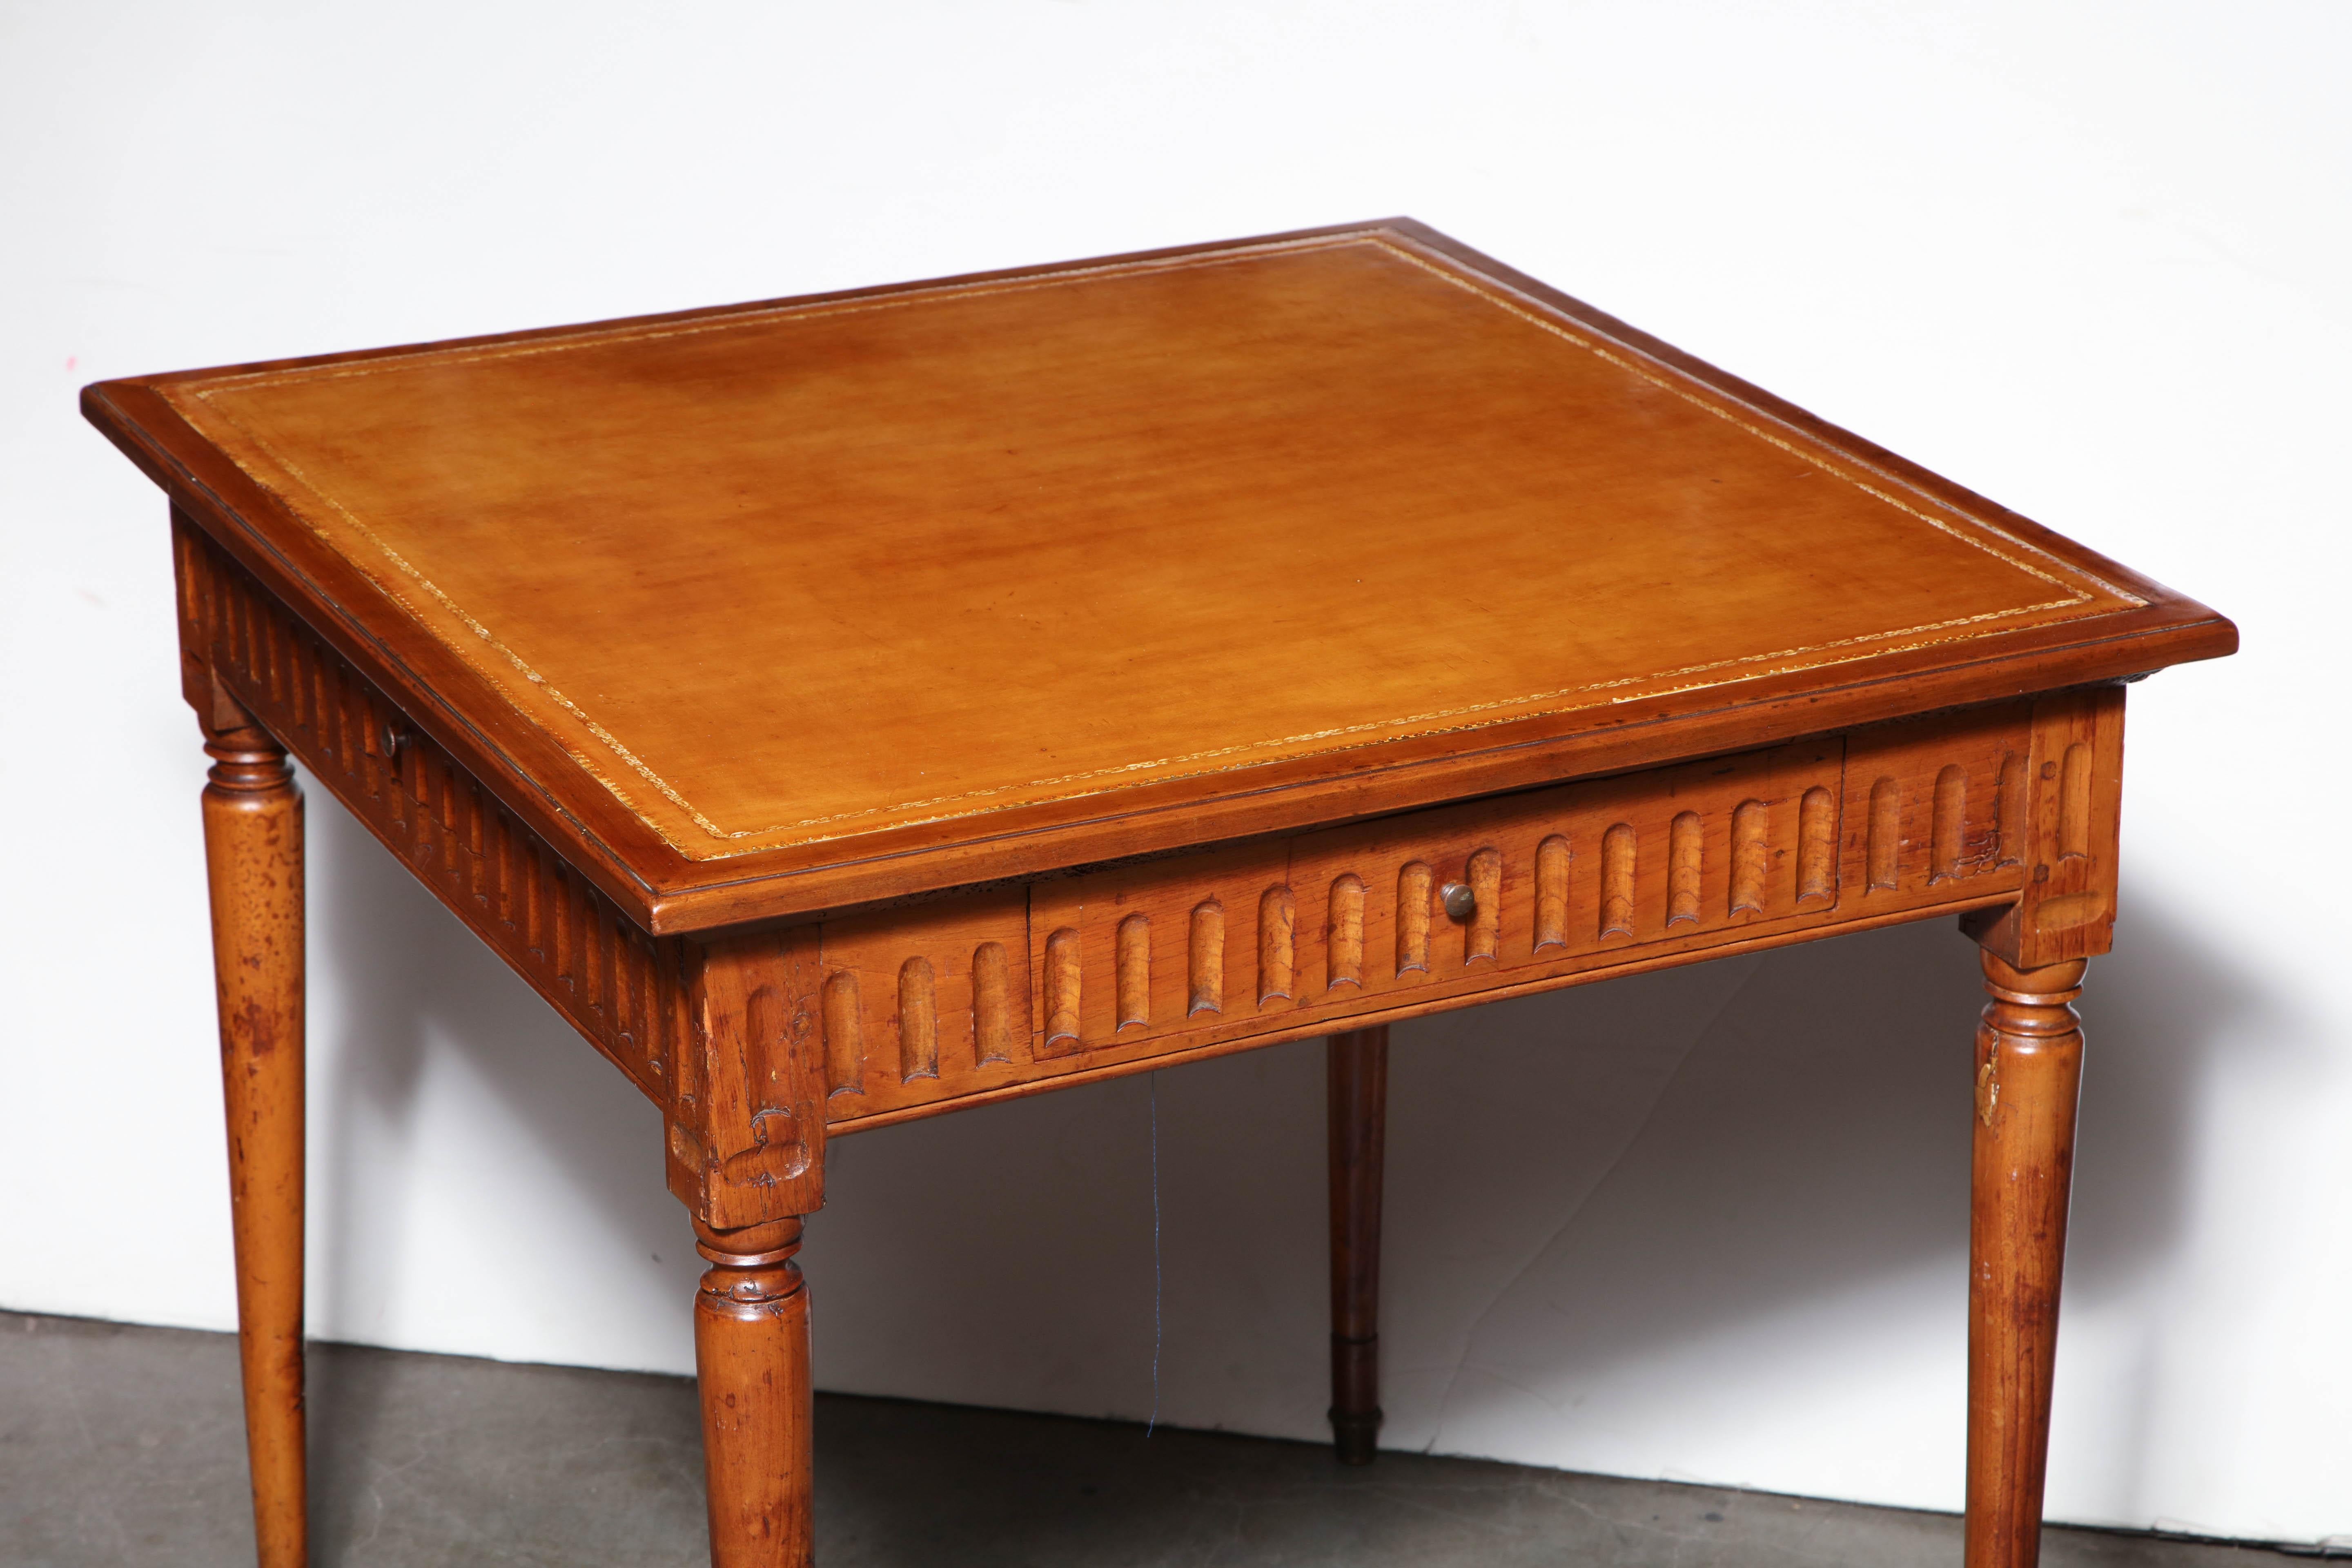 Italian walnut Louis XVI square game table with gold tooled leather top, fluted apron, three drawers and turned and tapered legs.